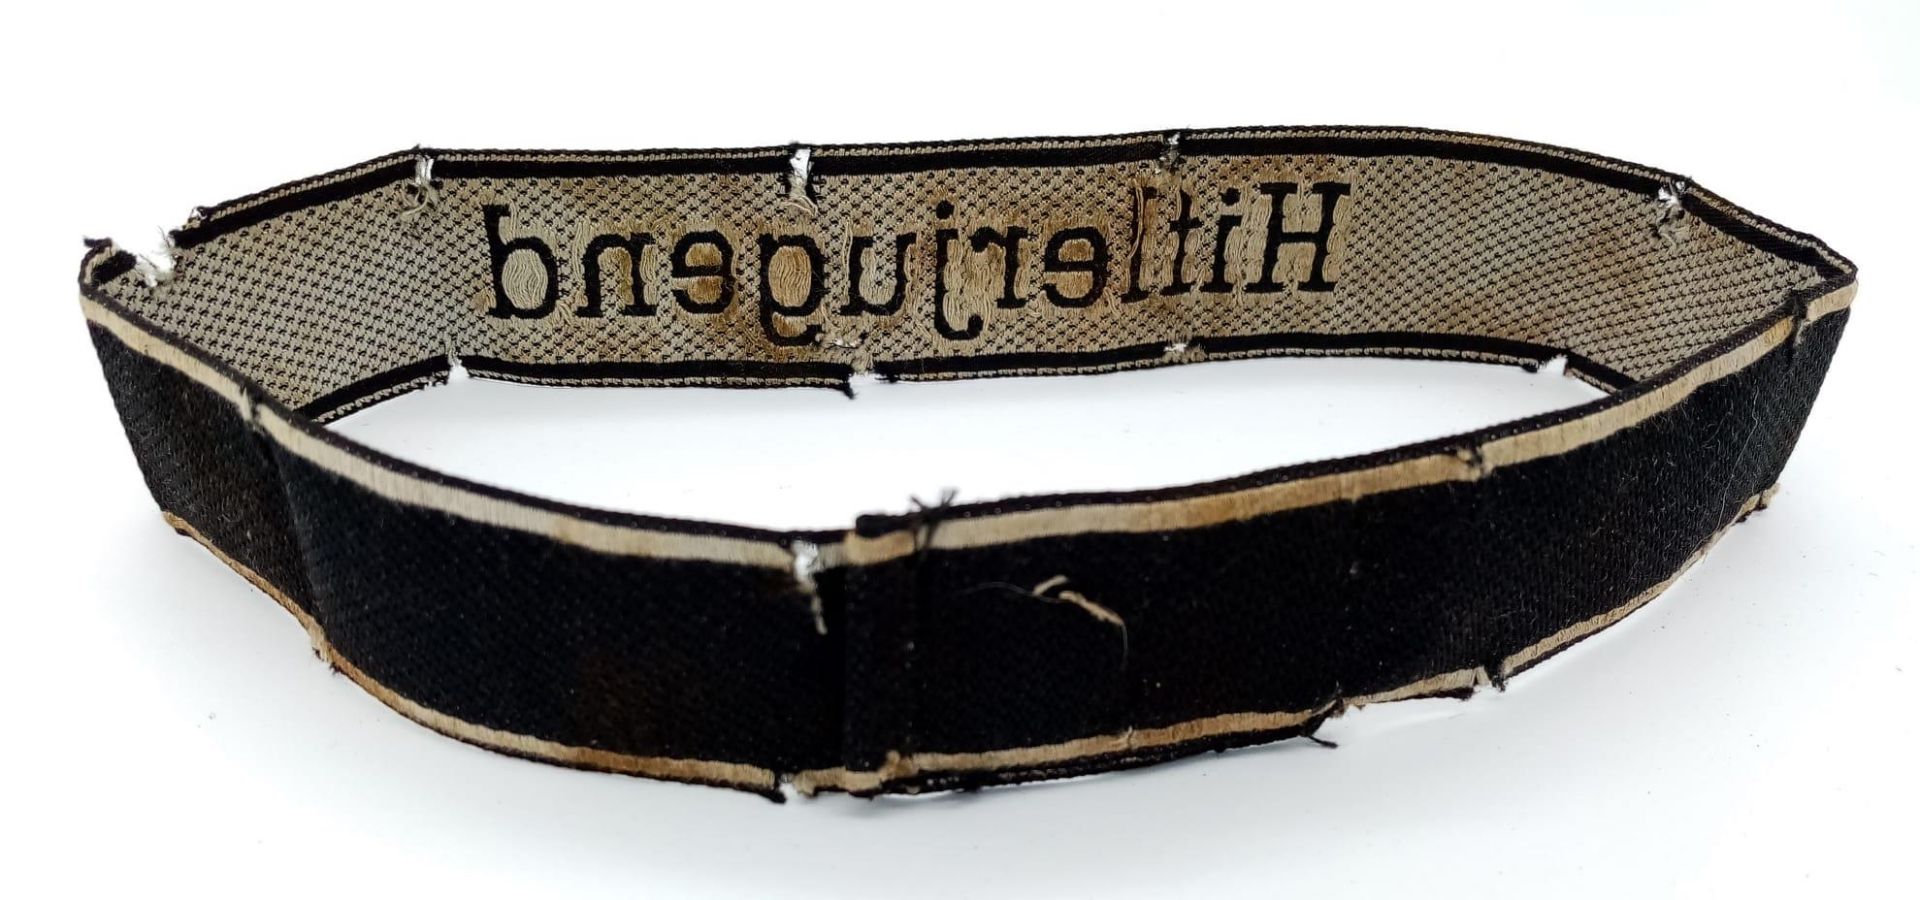 3rd Reich 12th SS Panzer “Hitler Youth” Cuff Title. Marked “Bevo Wuppental” Passes the black light - Image 2 of 3